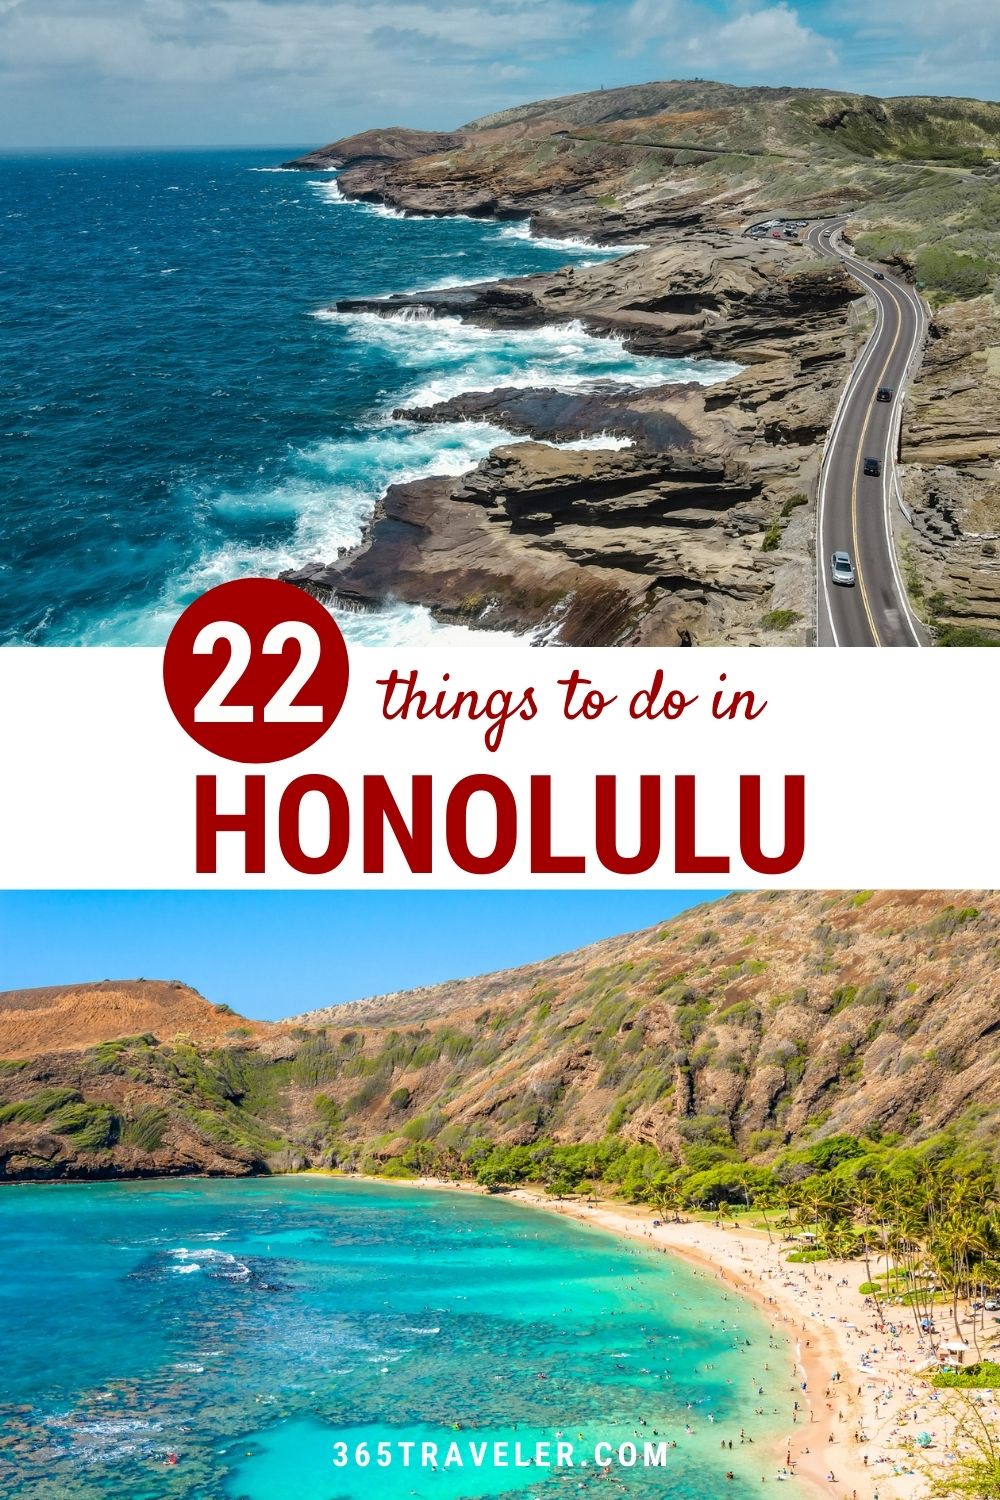 22 ABSOLUTELY AMAZING THINGS TO DO IN HONOLULU